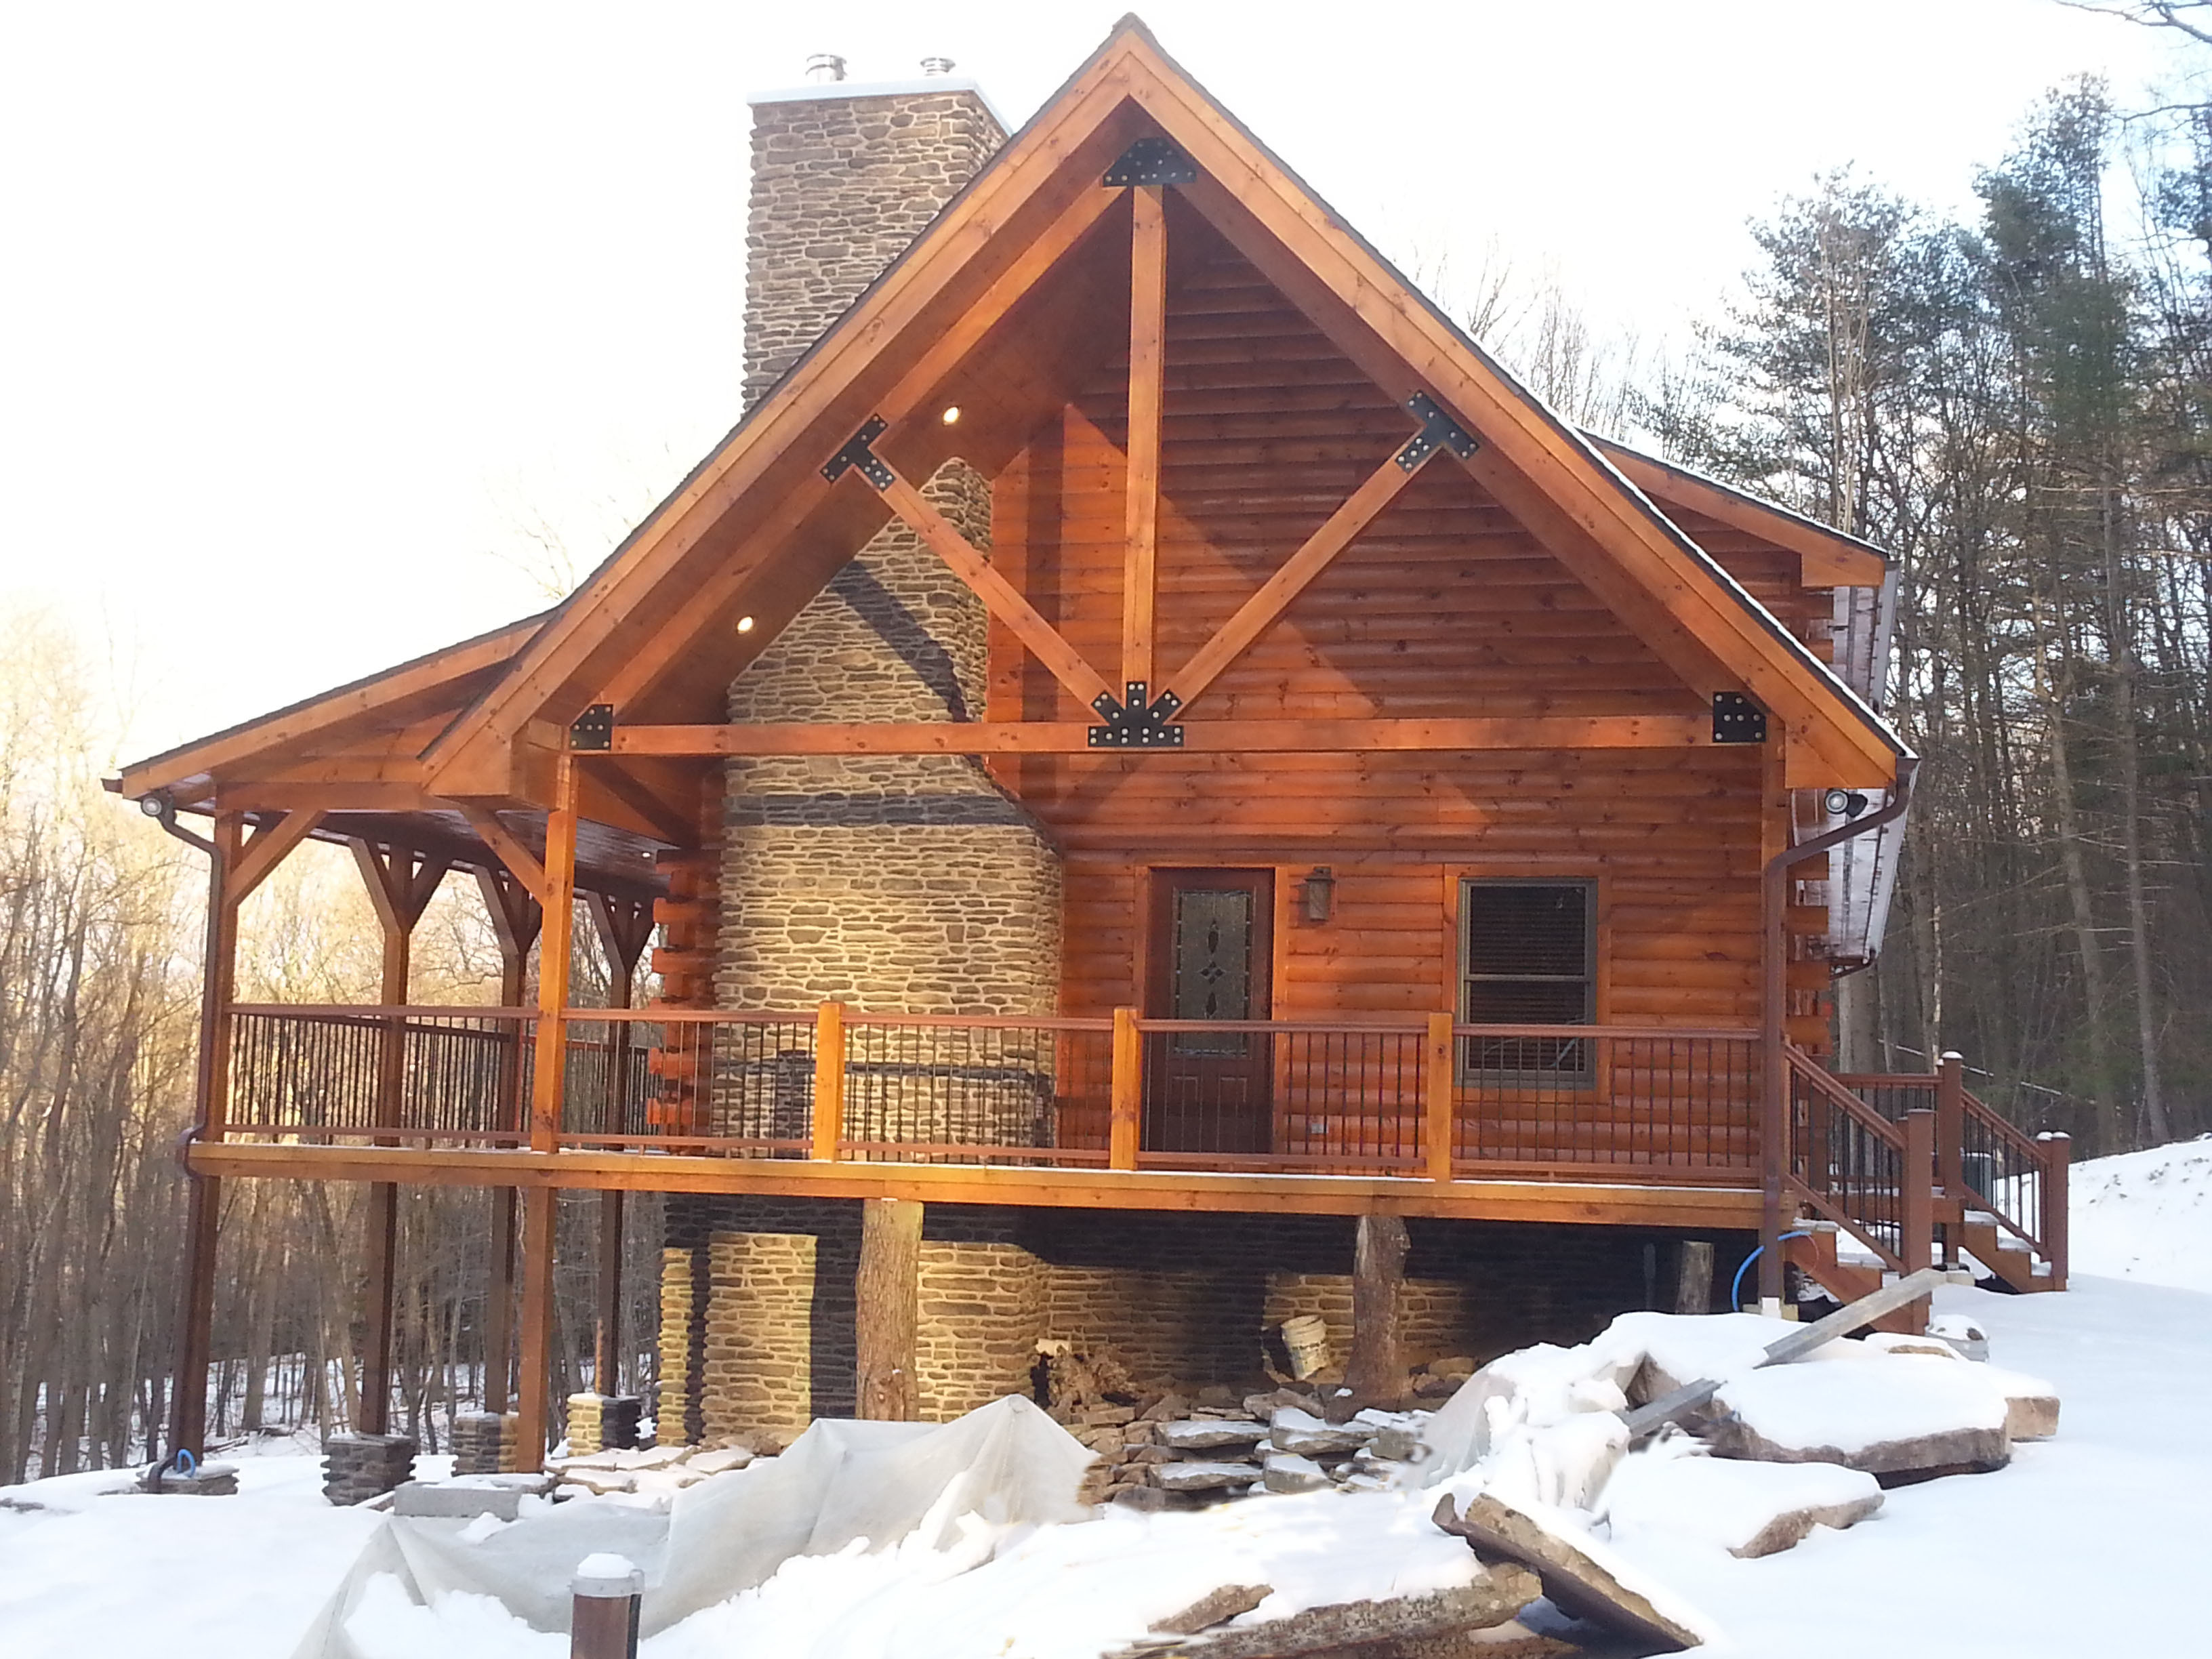 modified Valley View with King Post Truss and massive stone fireplace, Timberhaven Log Homes, Valley View, floor plan ideas, complete customization, laminated logs, engineered logs, kiln dried logs, design services, Pennsylvania, log homes, log cabins, log cabin kits, log cabin homes, log home packages